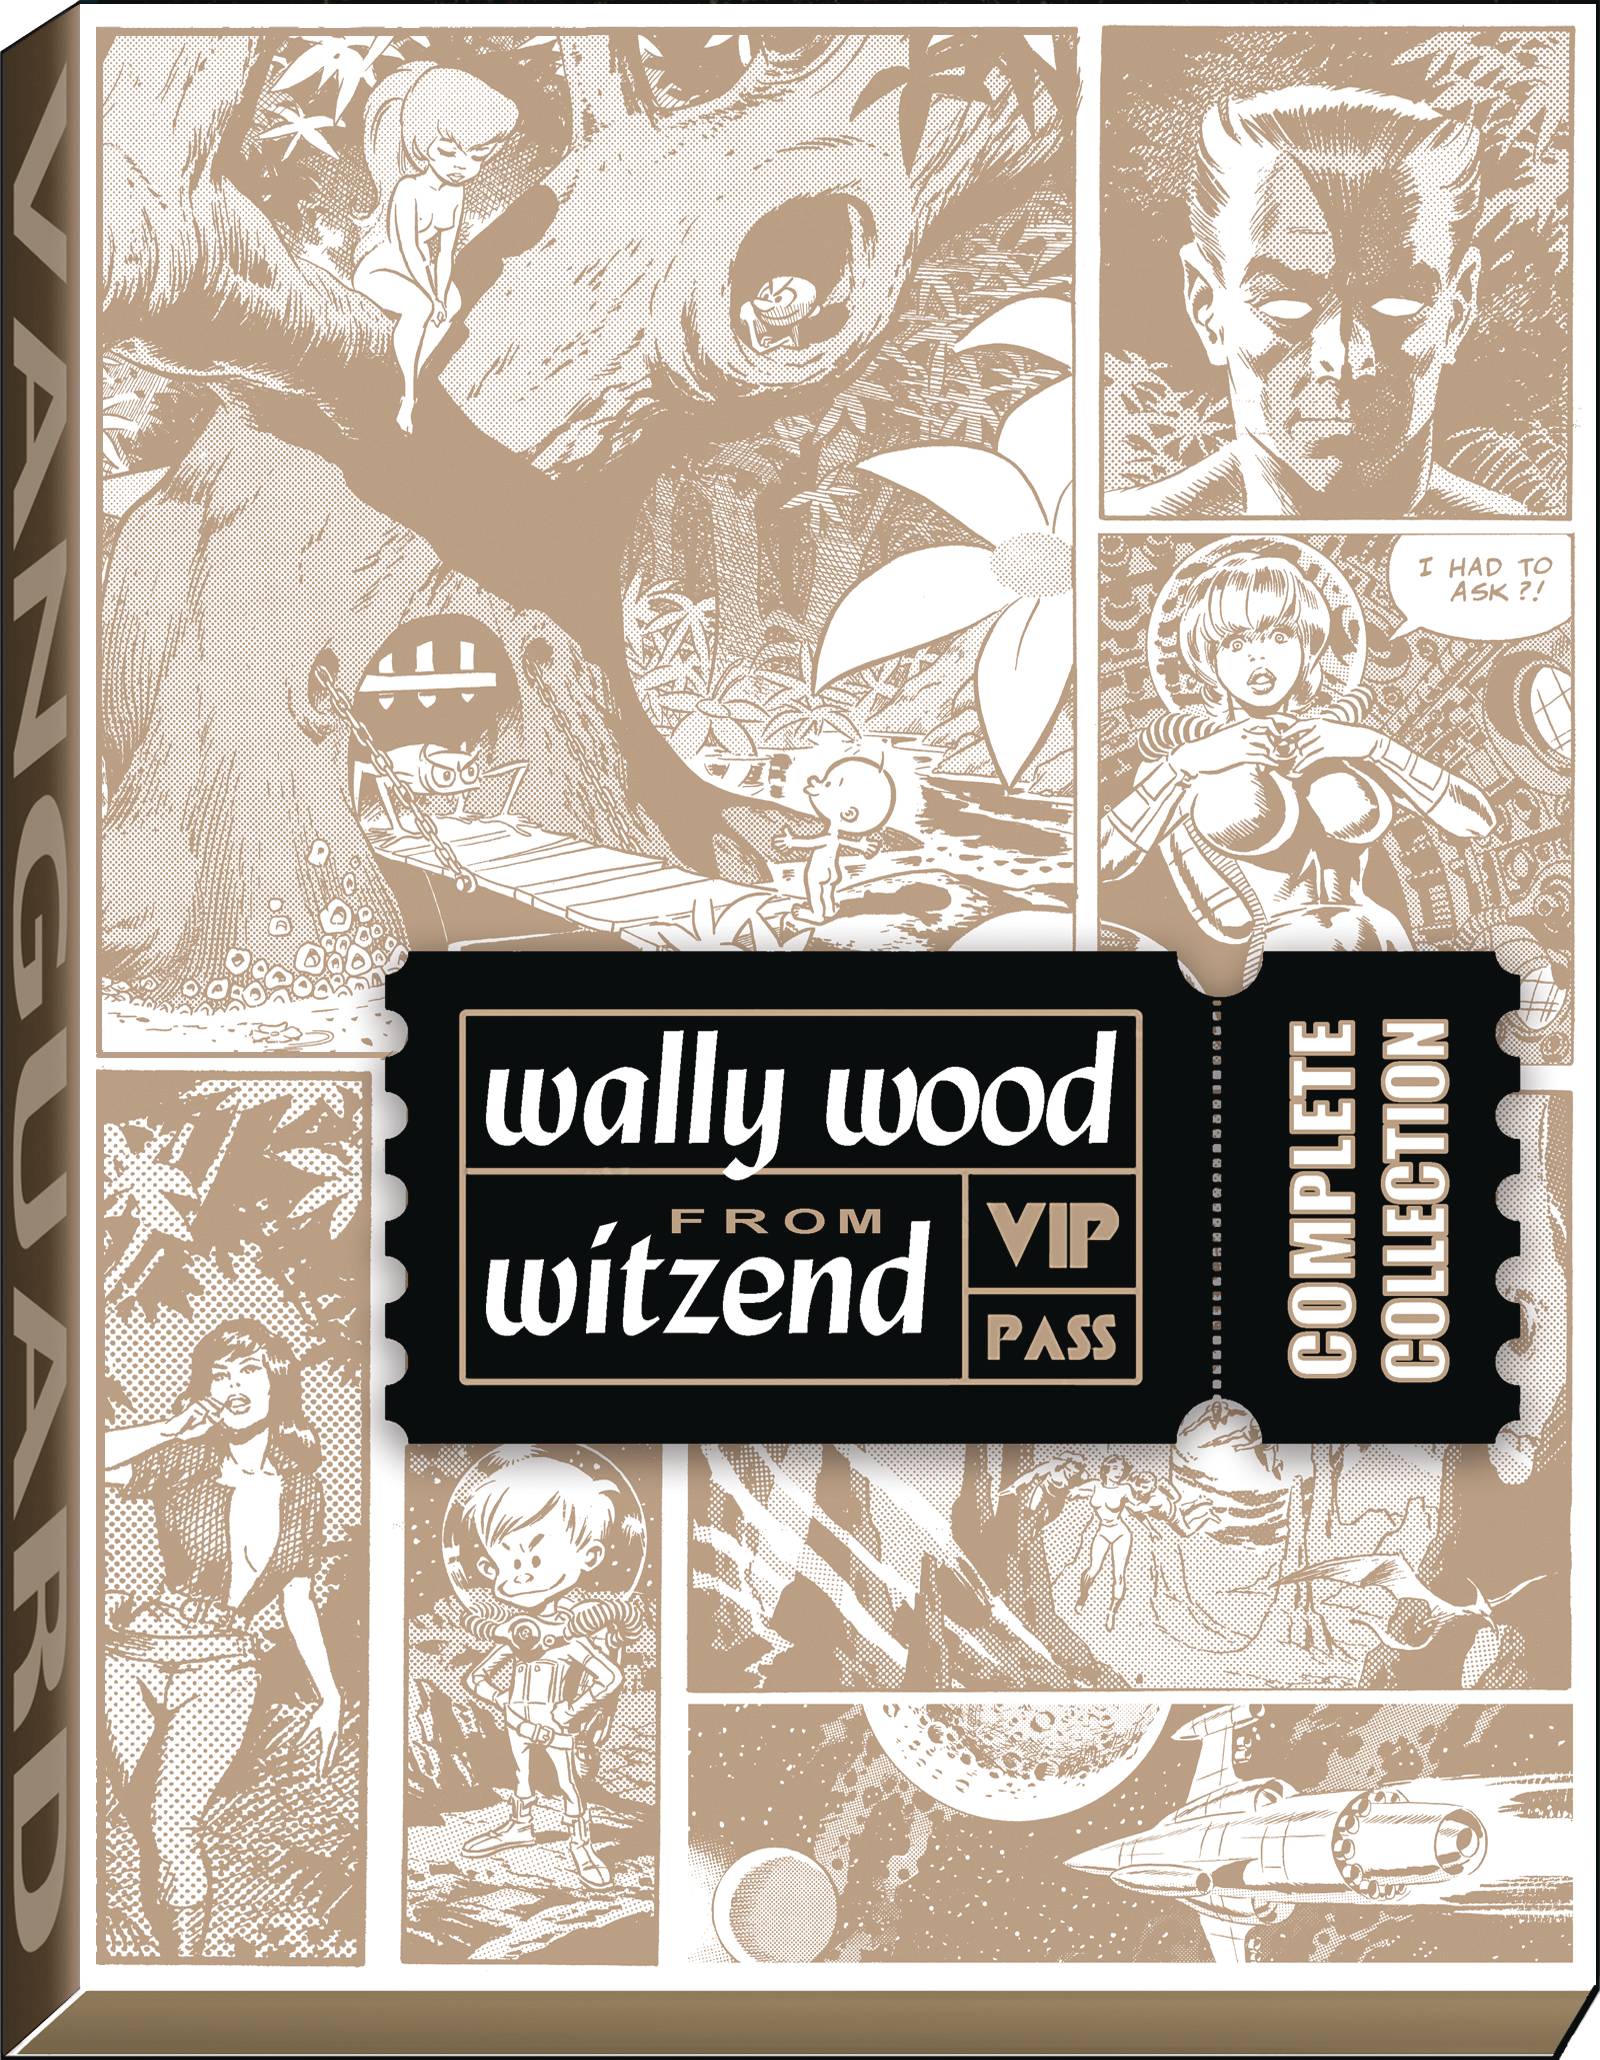 COMPLETE WALLY WOOD FROM WITZEND HC